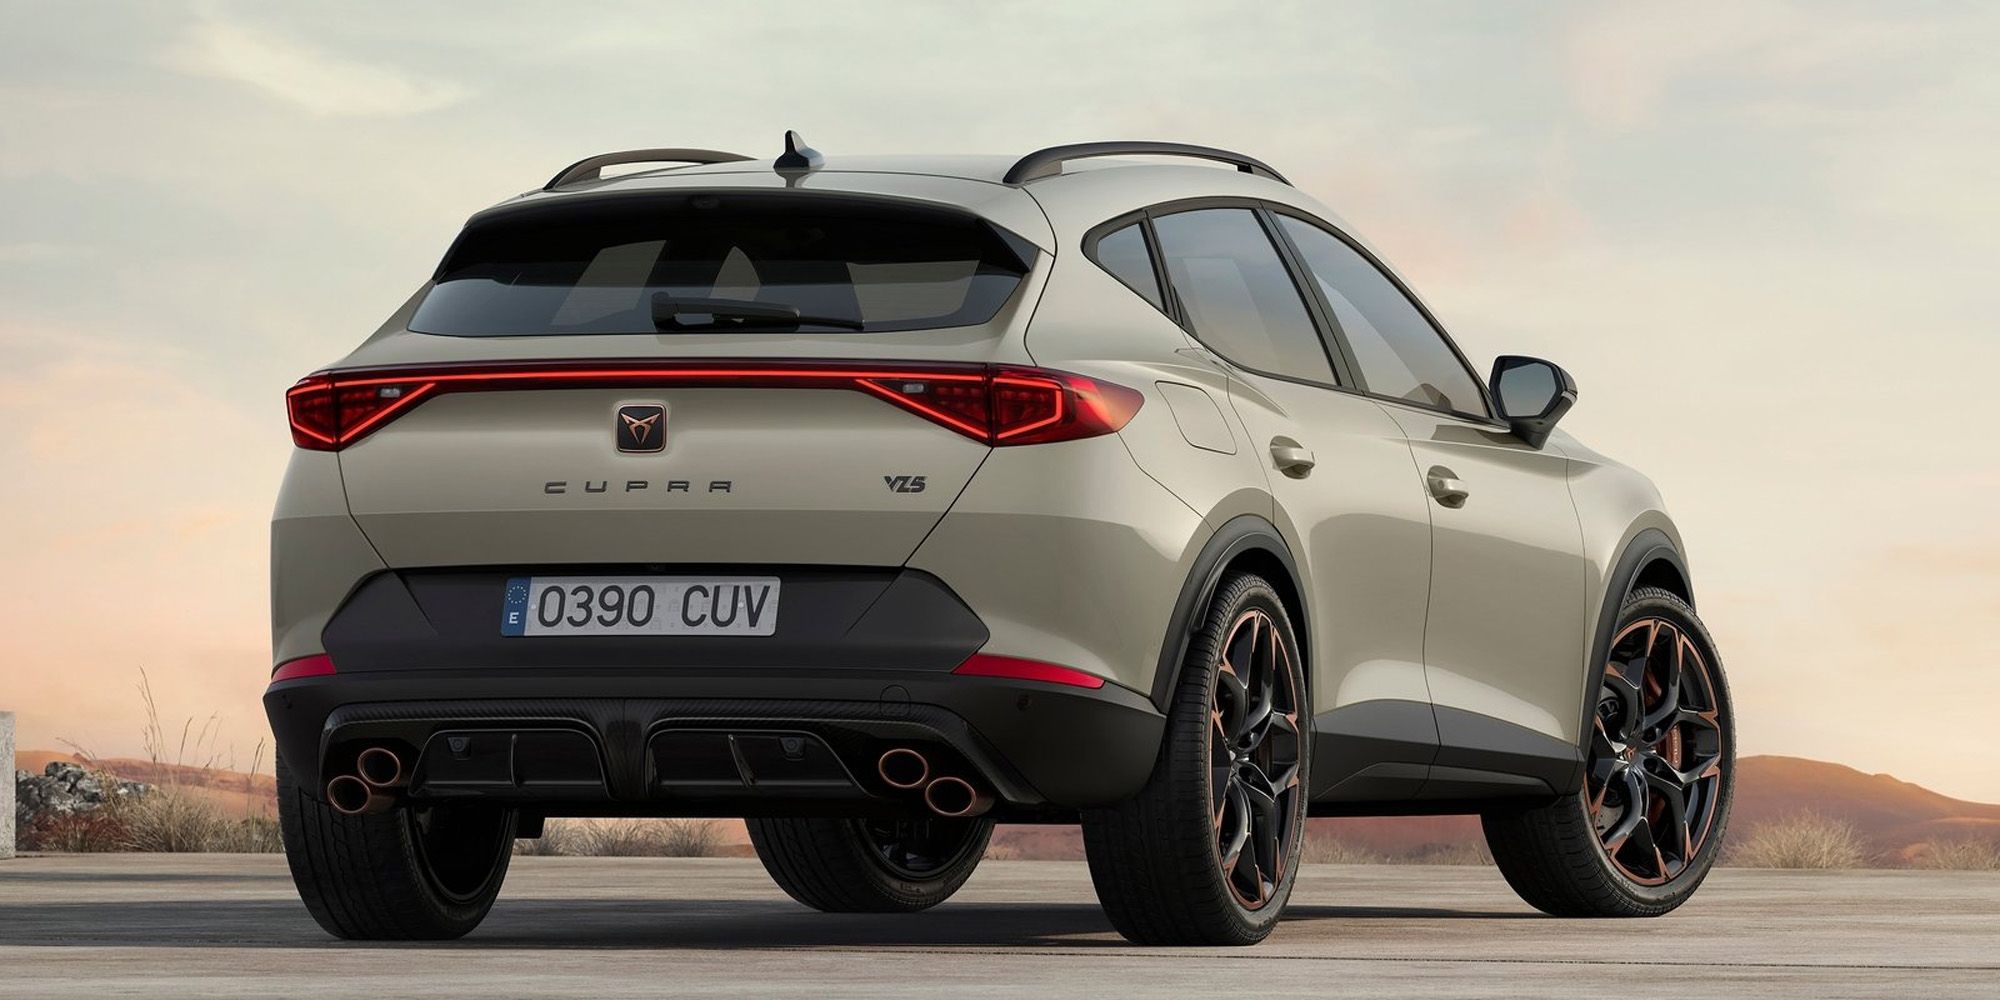 The rear of the Cupra Formentor VZ5